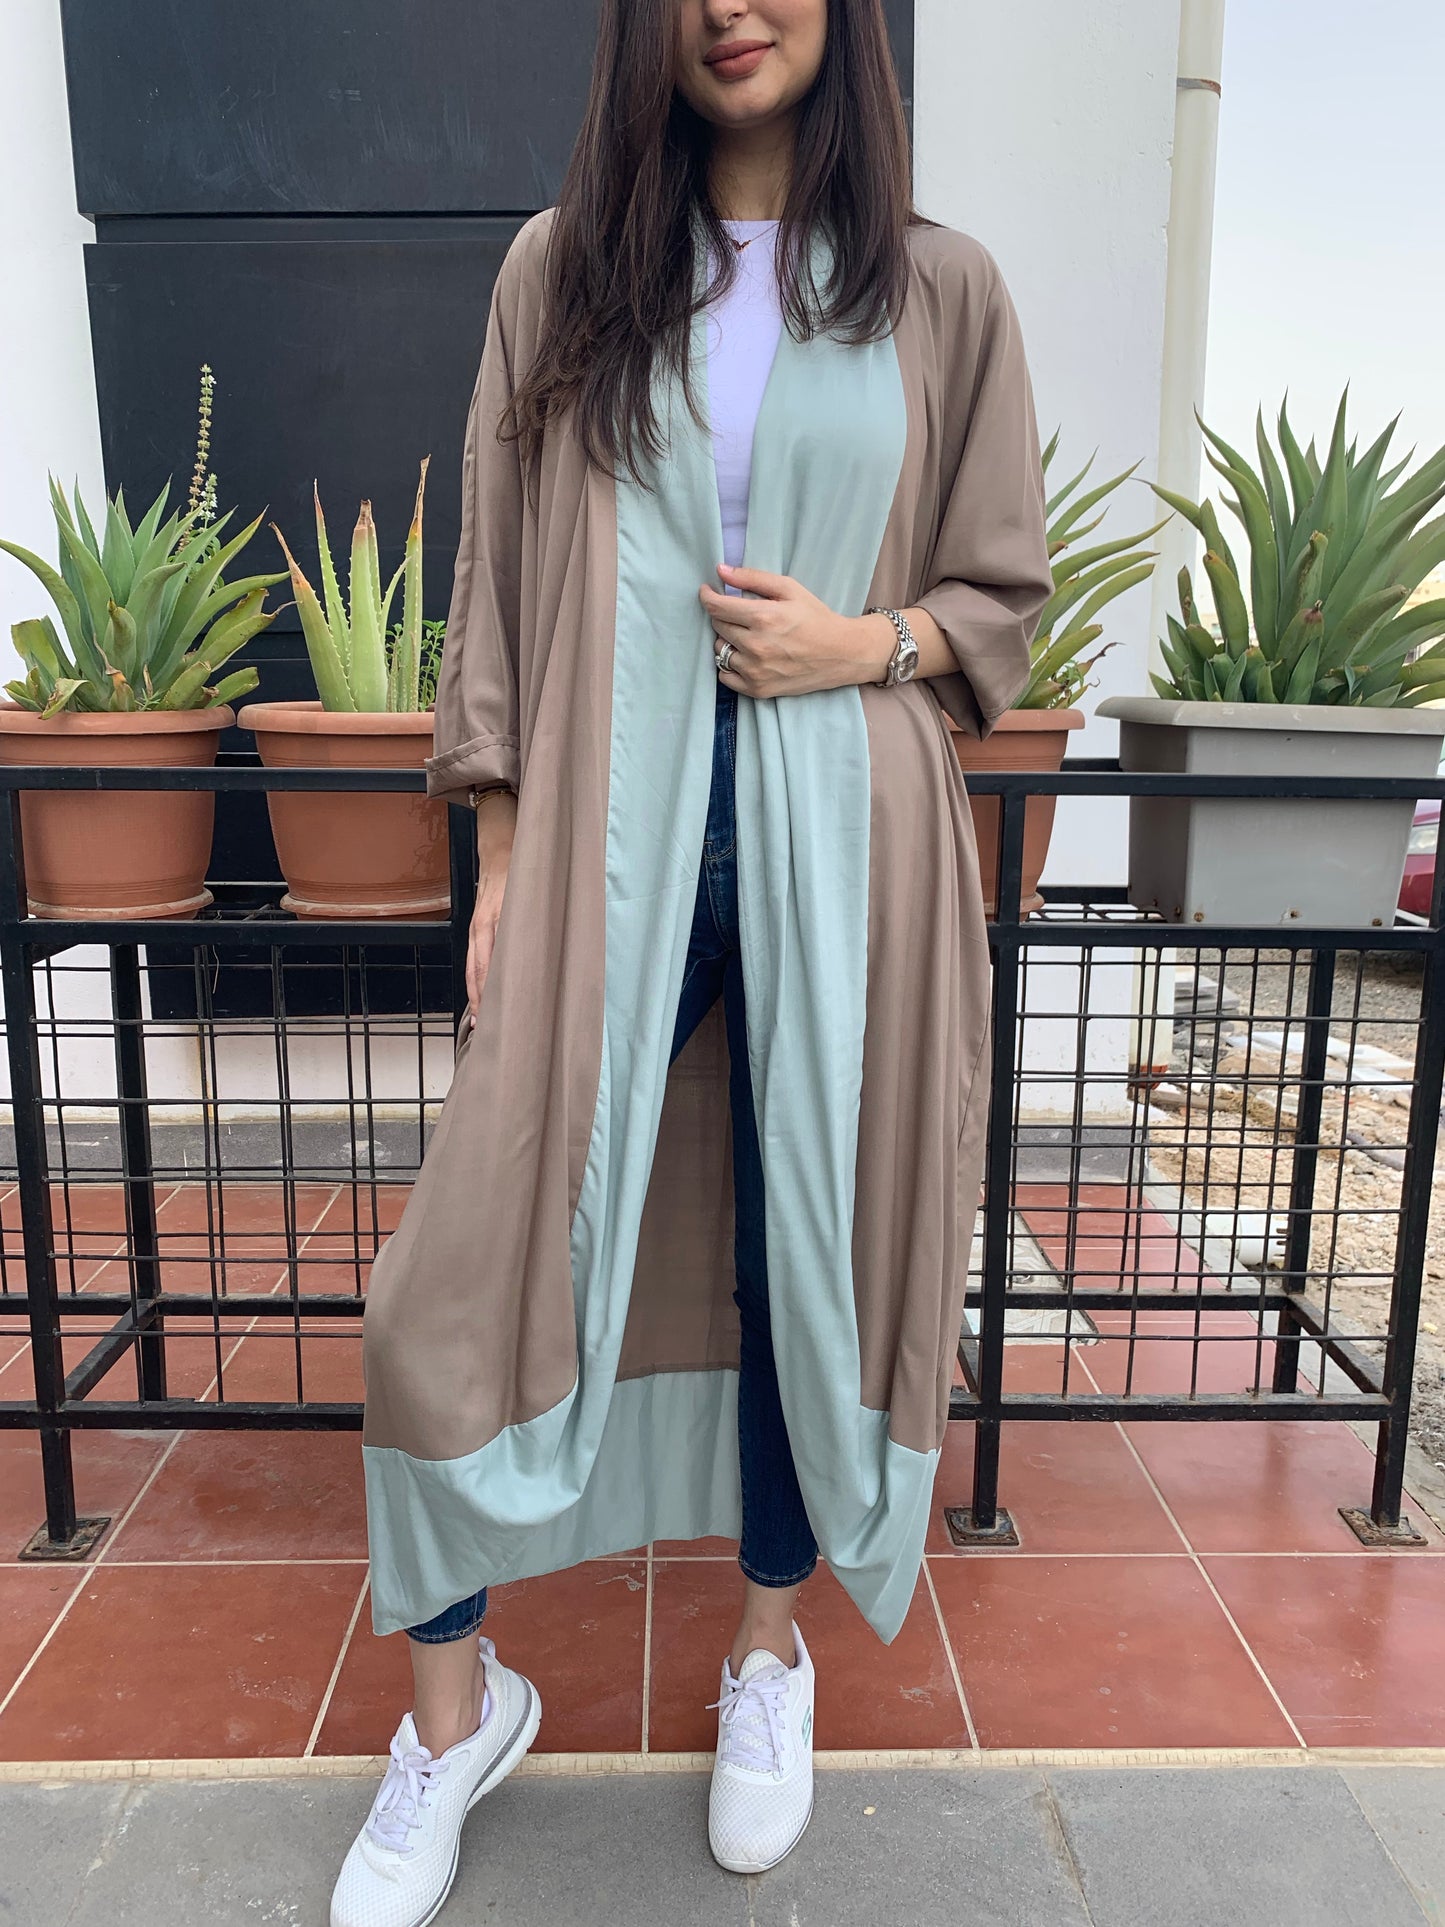 The Summertime Abaya - Lightweight & Soft - The Untitled Project